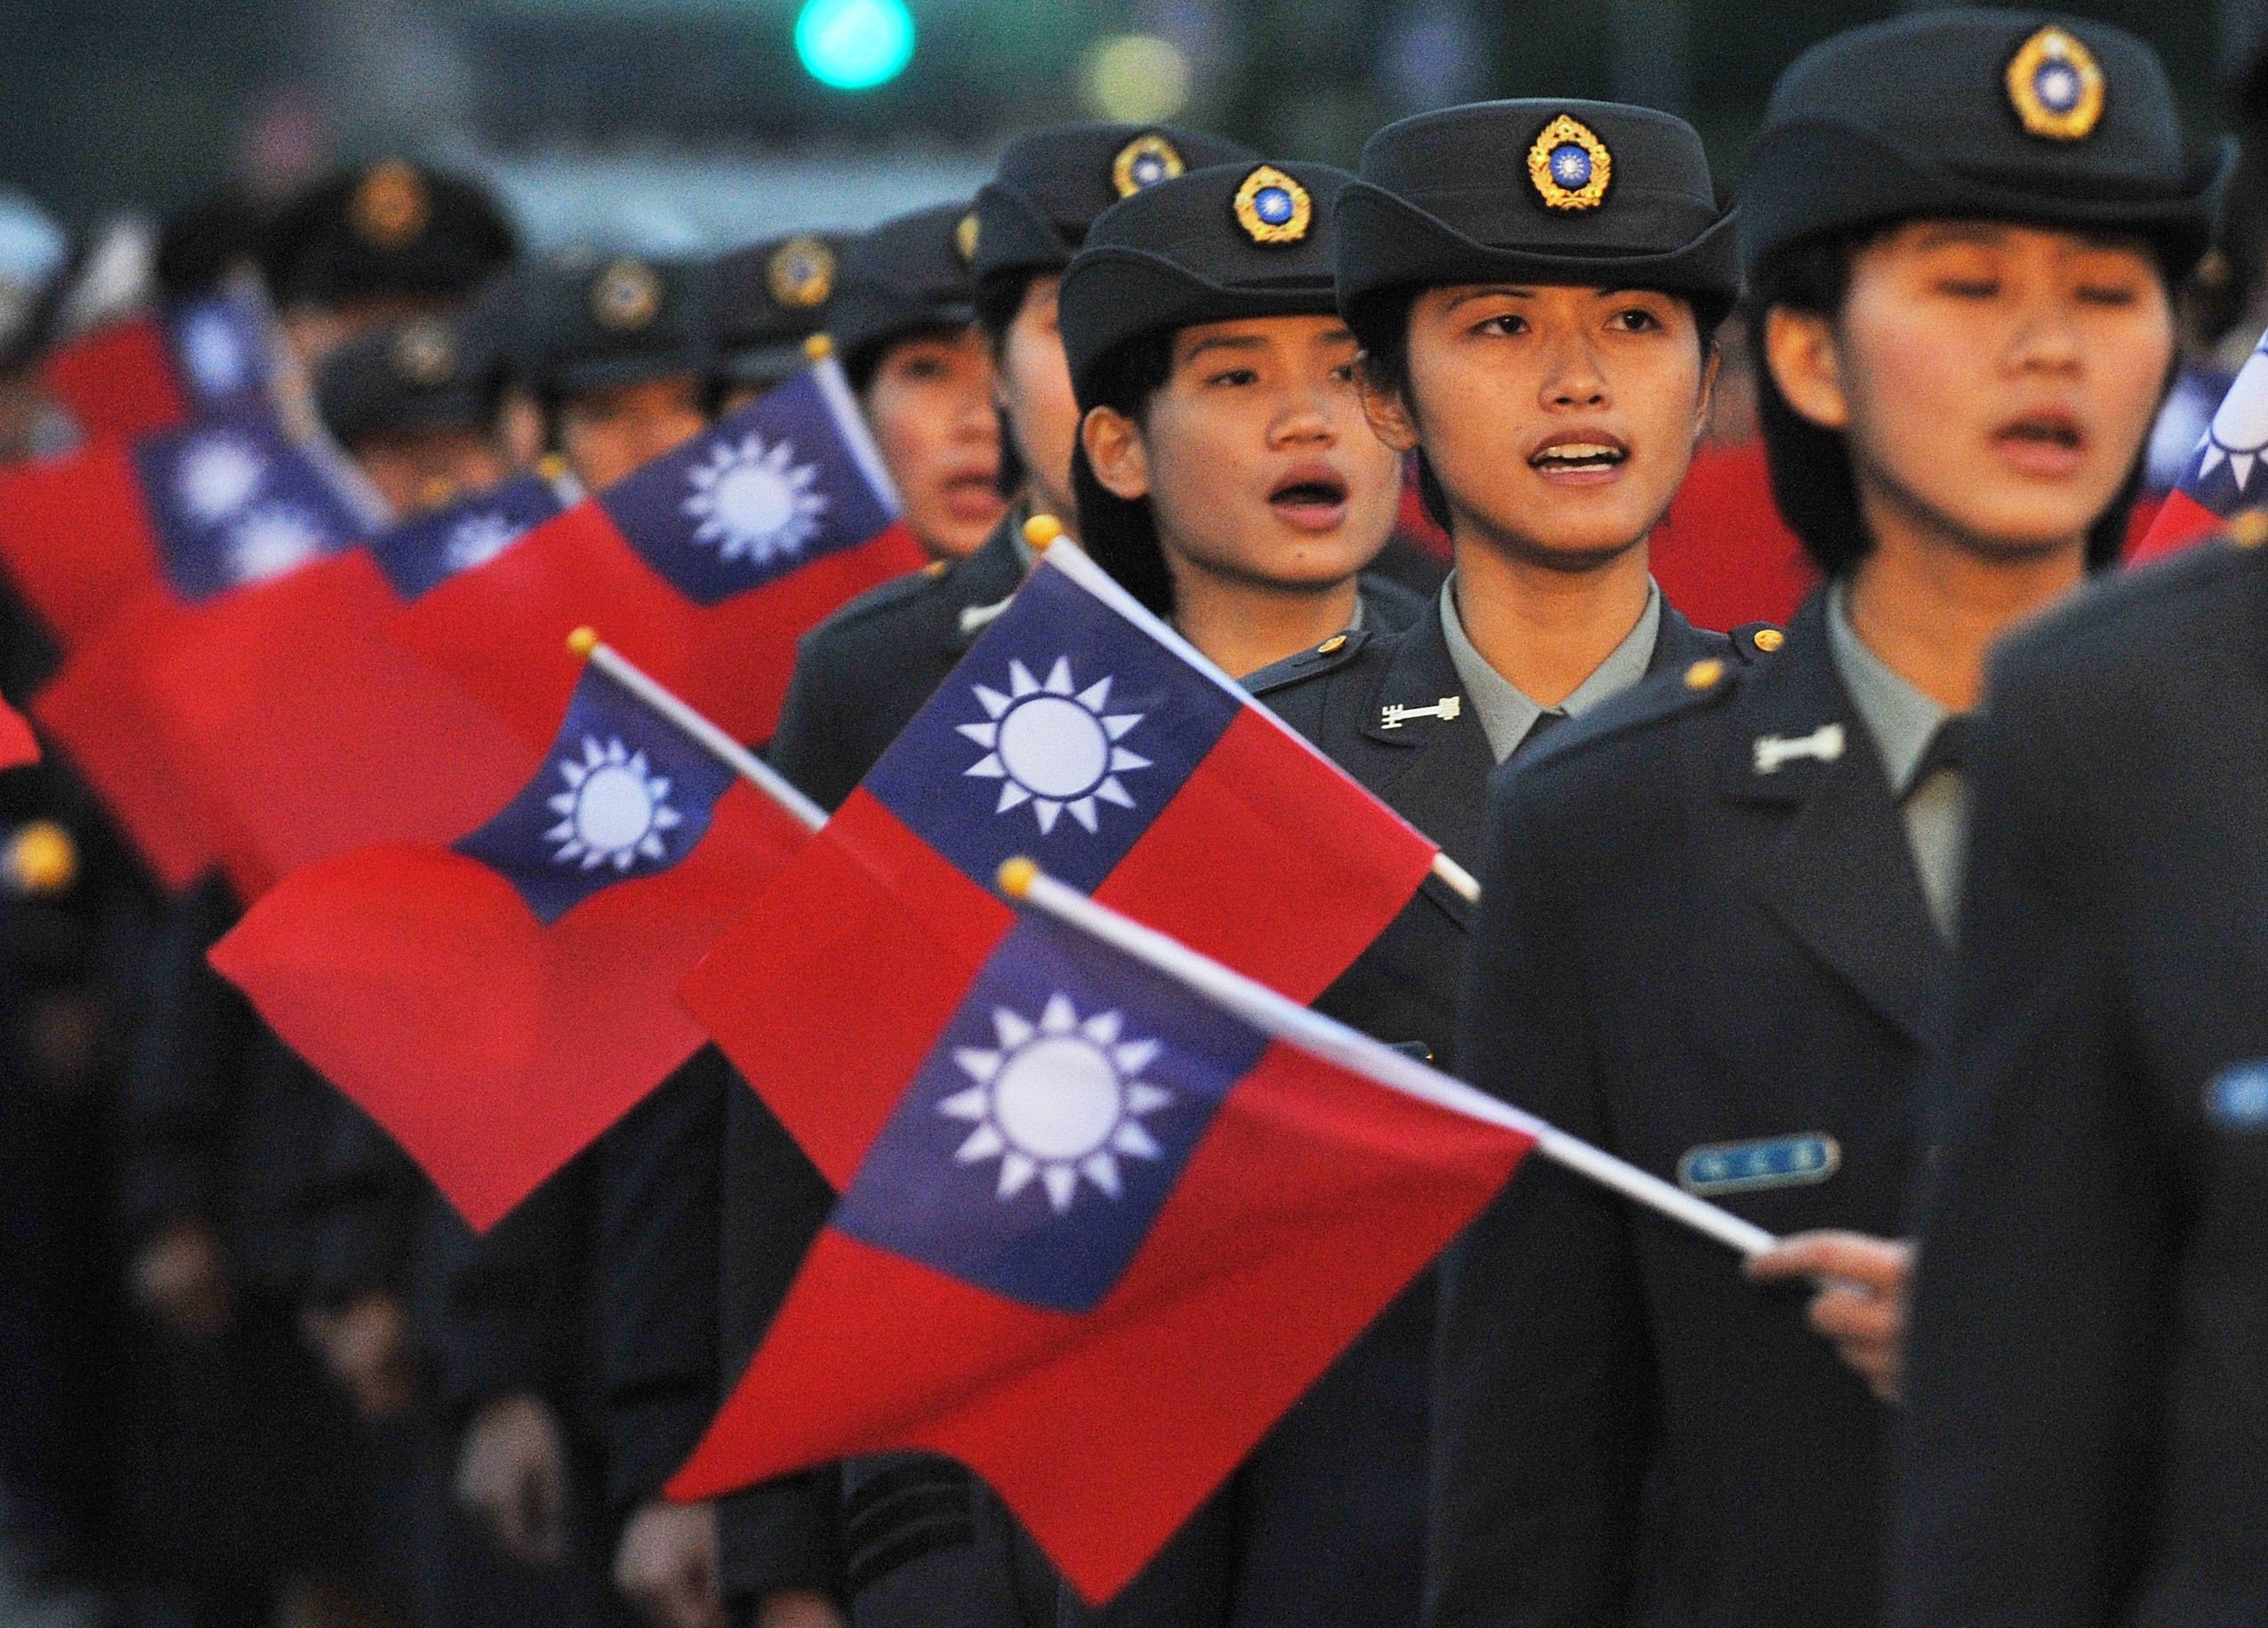 Military school students attend a flag-raising ceremony in Taipei. The self-ruled island is expected to come under greater unification pressure if Xi Jinping stays on as Chinese president past 2023. Photo: AFP